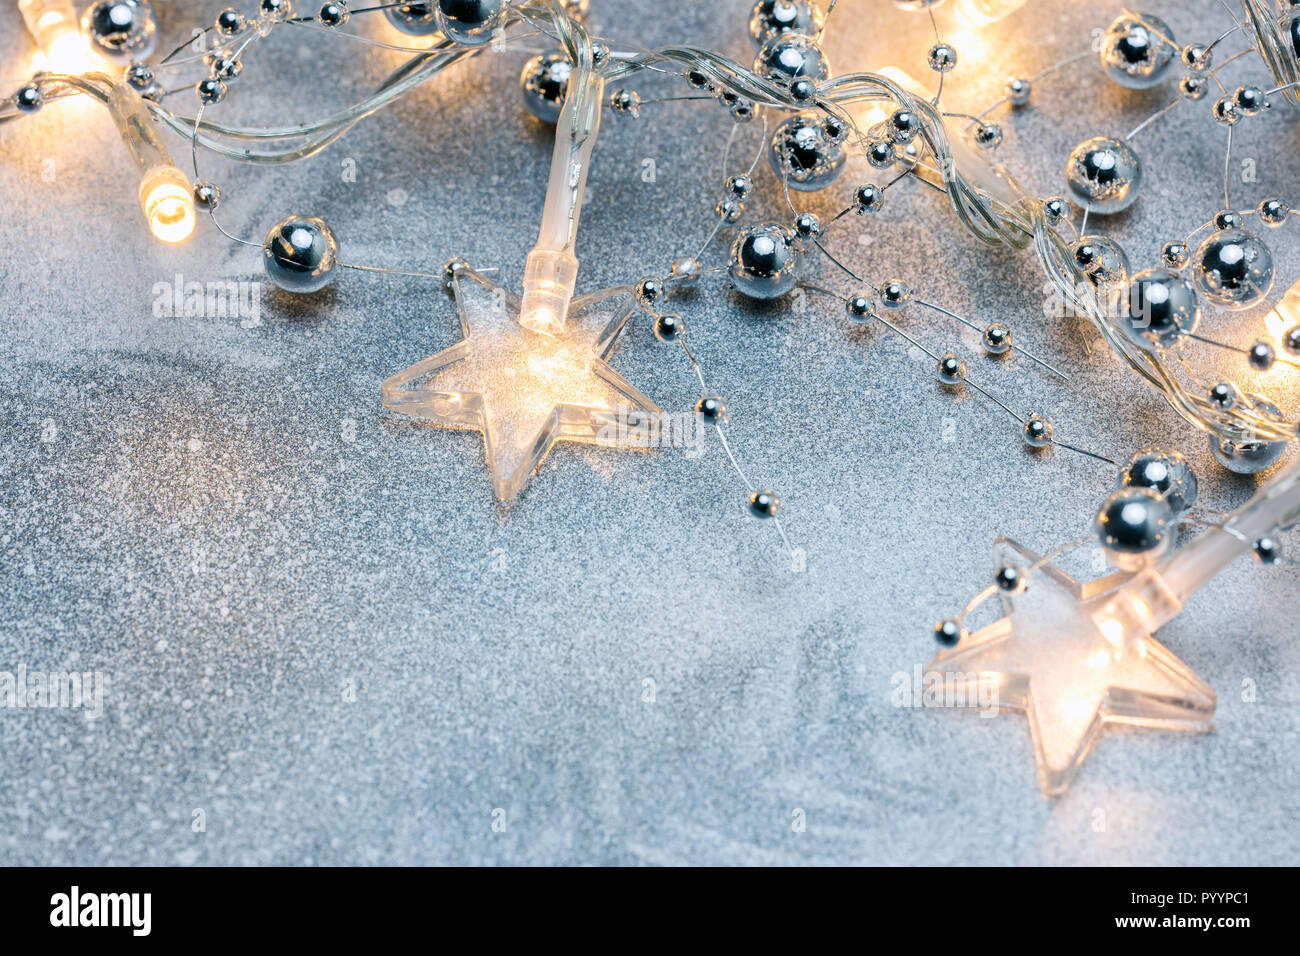 silver christmas background with glowing light garlands and decorative beads. macro view Stock Photo